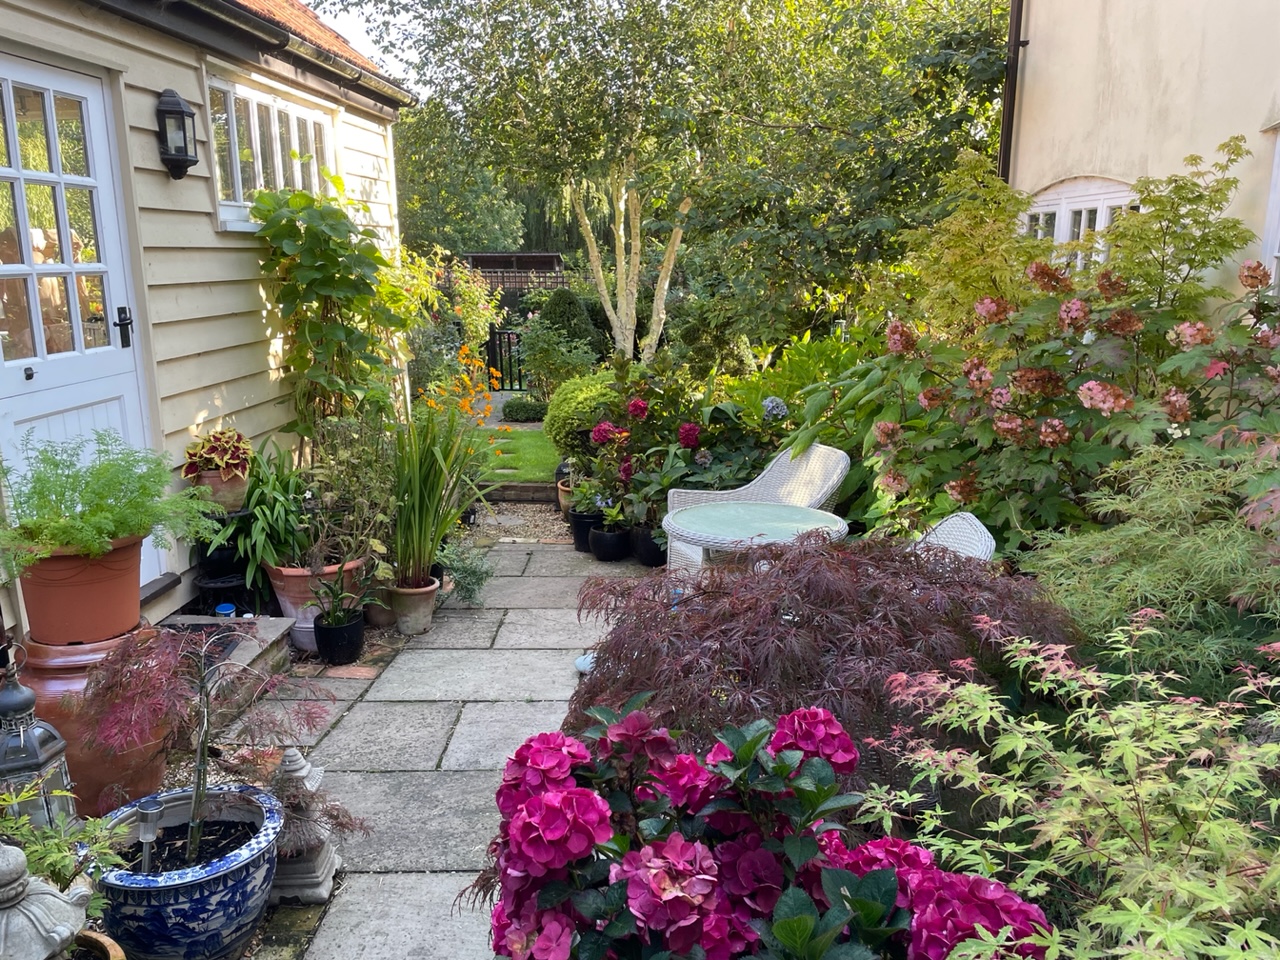 Courtyard with flowers and shrubs in pots and planters